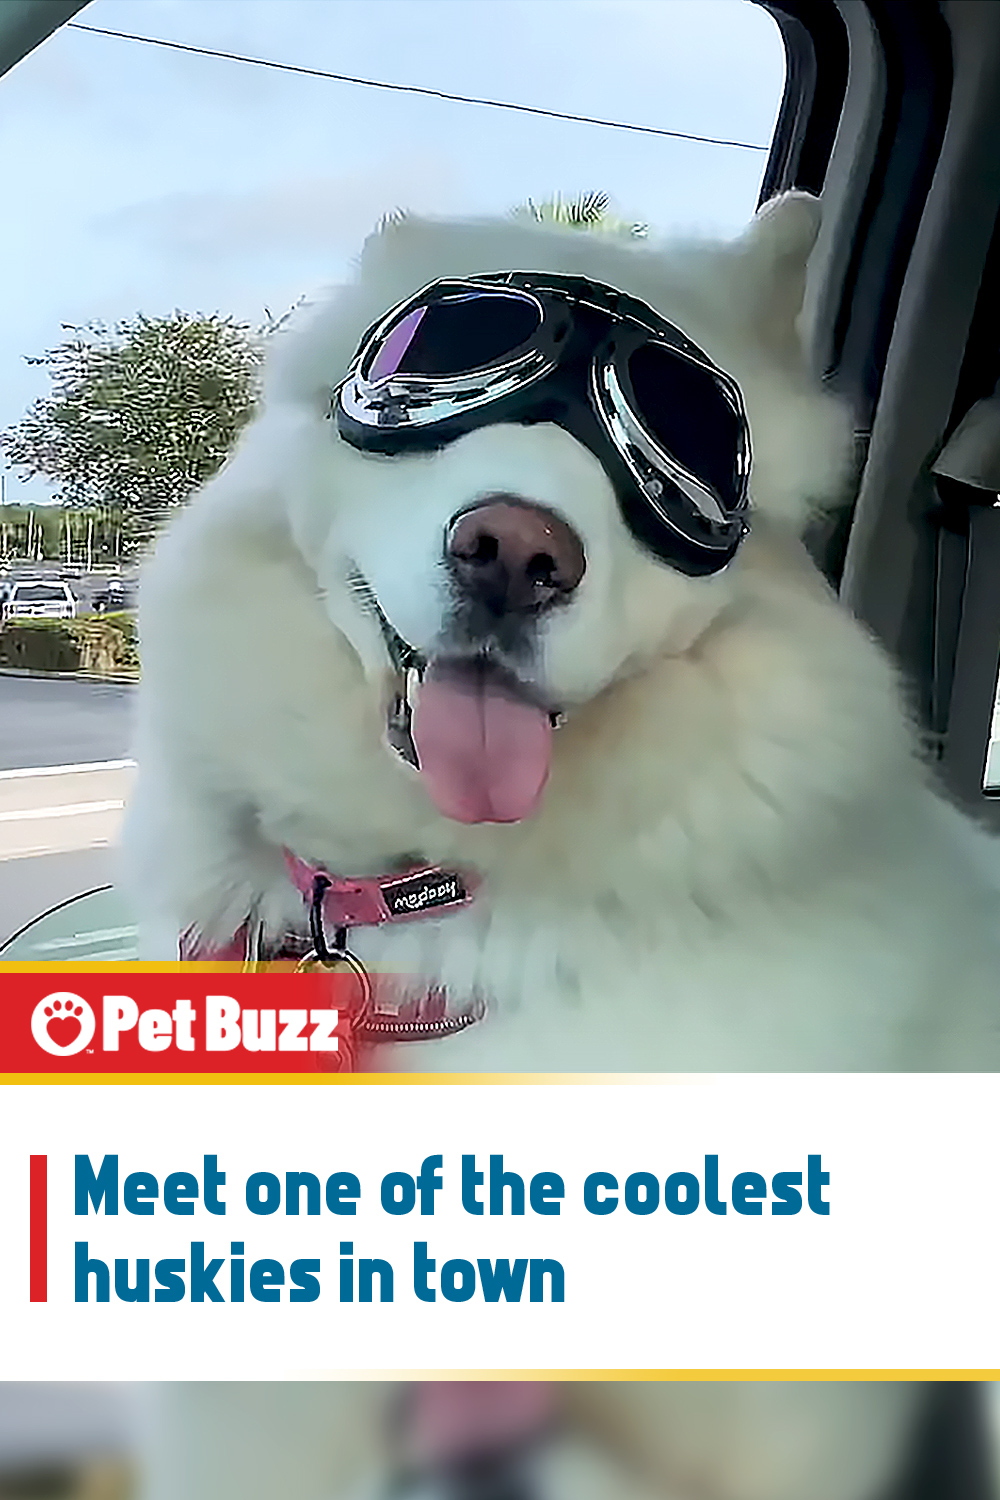 Meet one of the coolest huskies in town